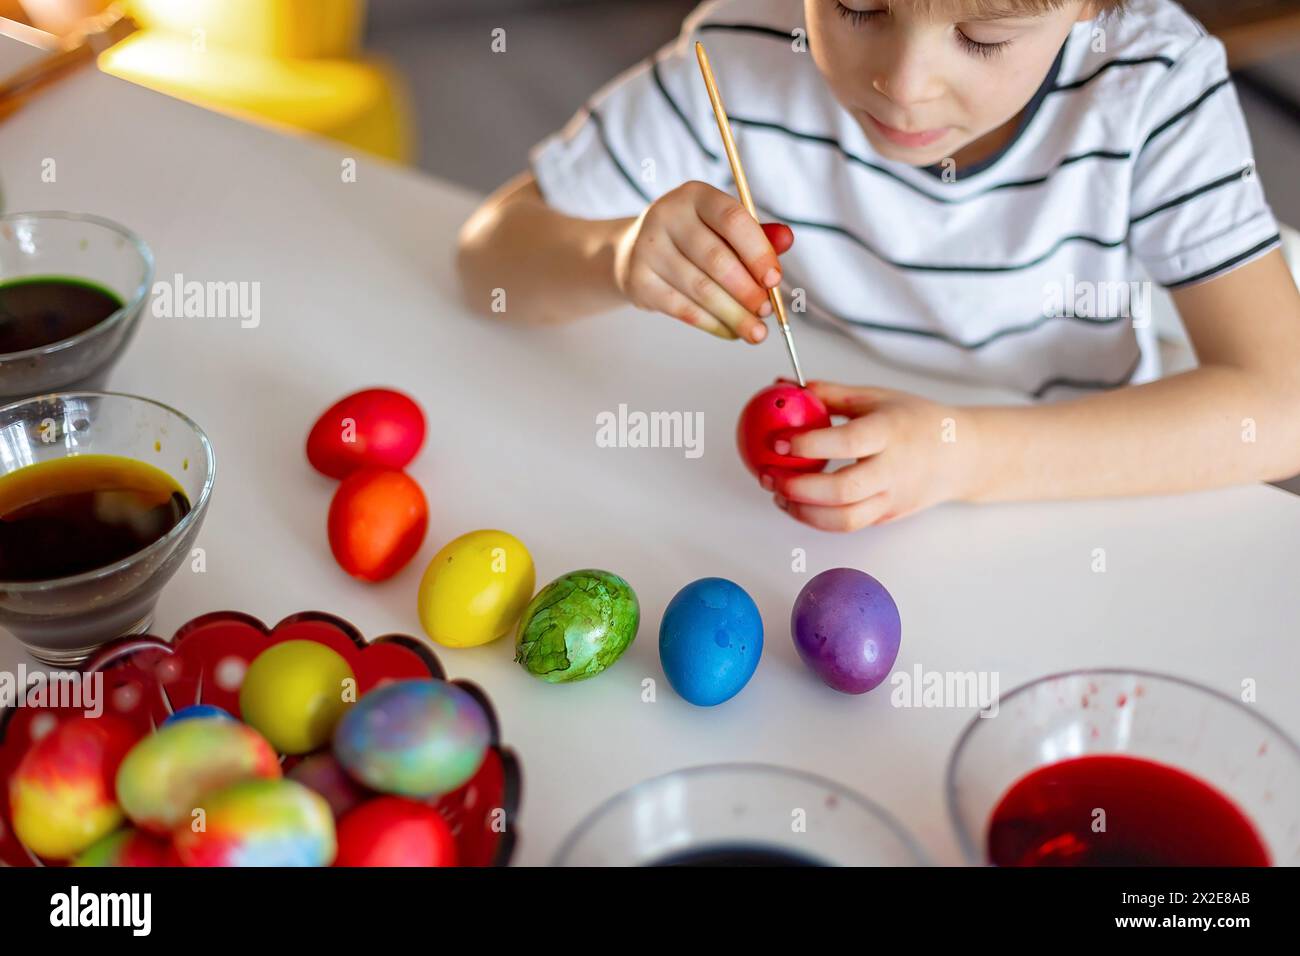 Beatiful blond child, boy, coloring and painting eggs for Easter at home, preparing for the holidays Stock Photo